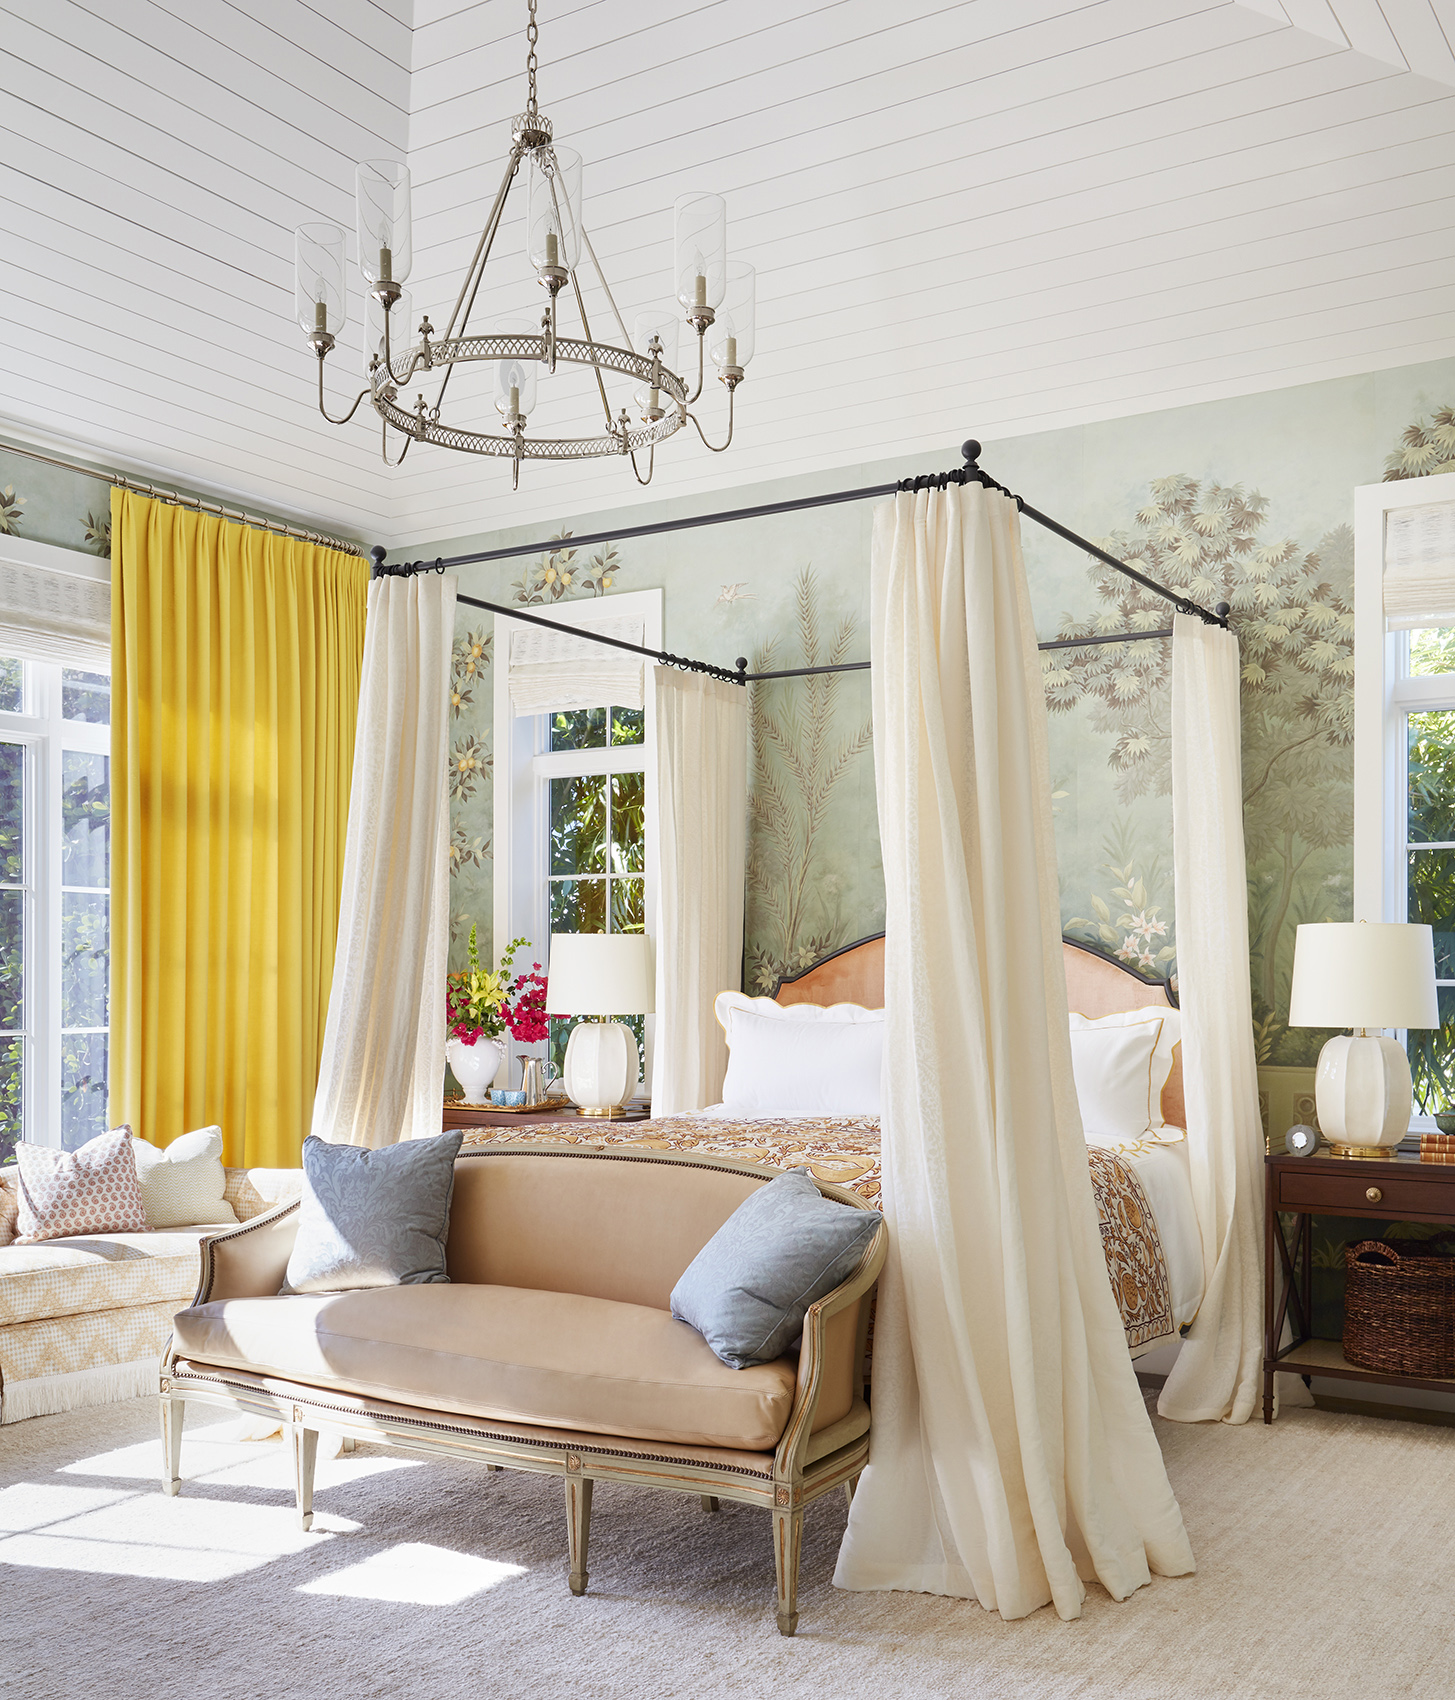 A romantic four poster bed designed by Summer Thornton for this master bedroom located in Old Naples, FL